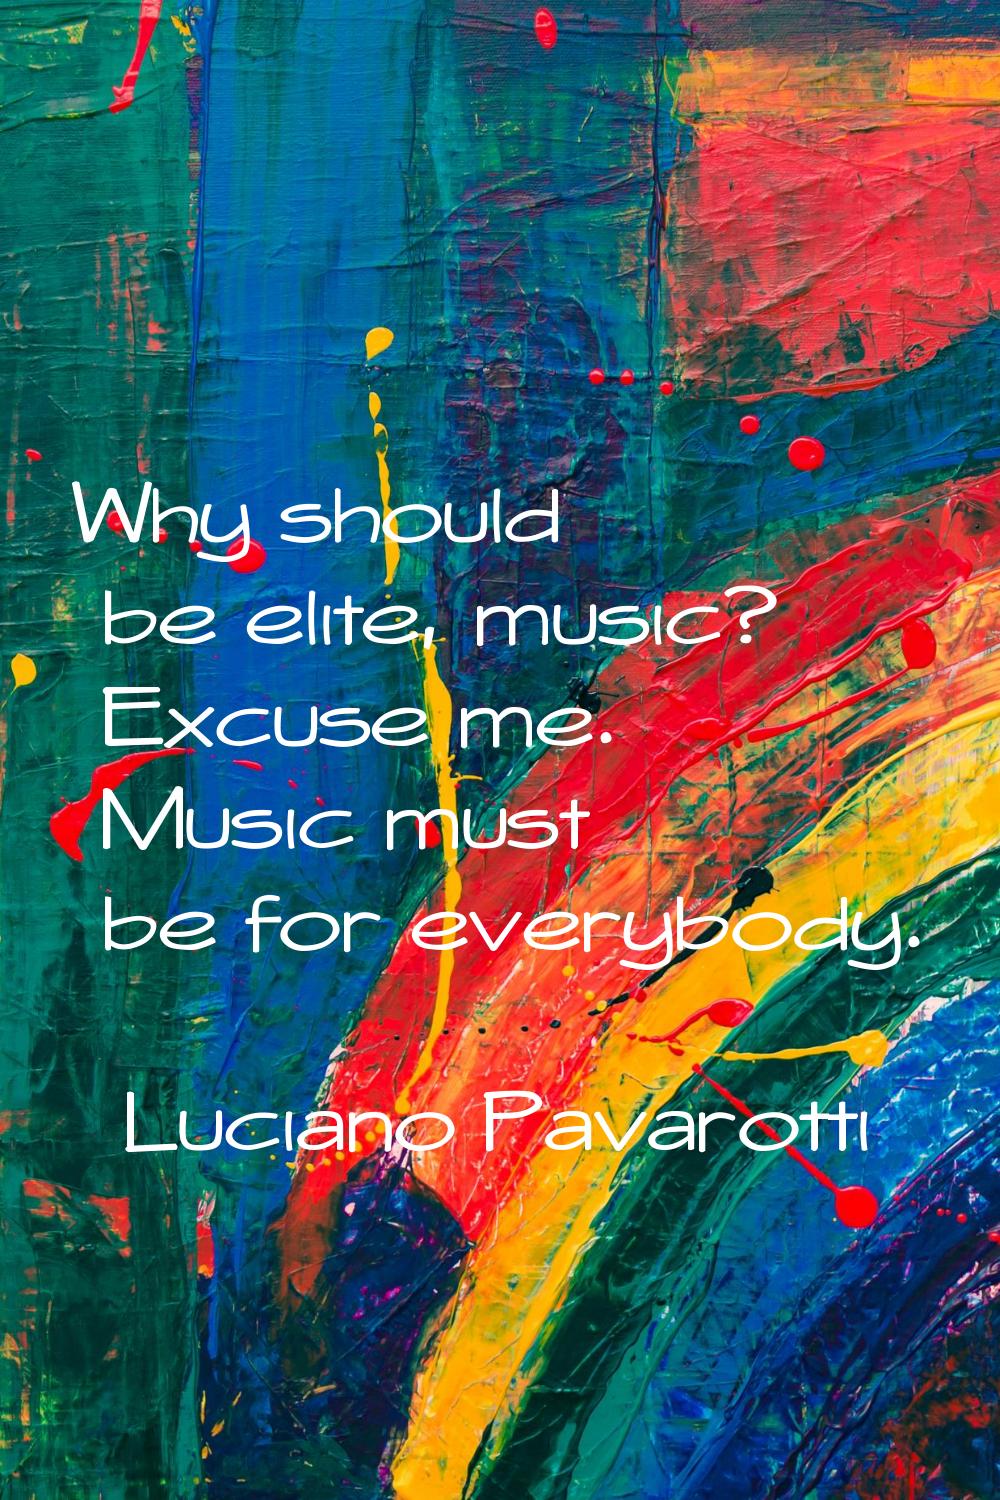 Why should be elite, music? Excuse me. Music must be for everybody.